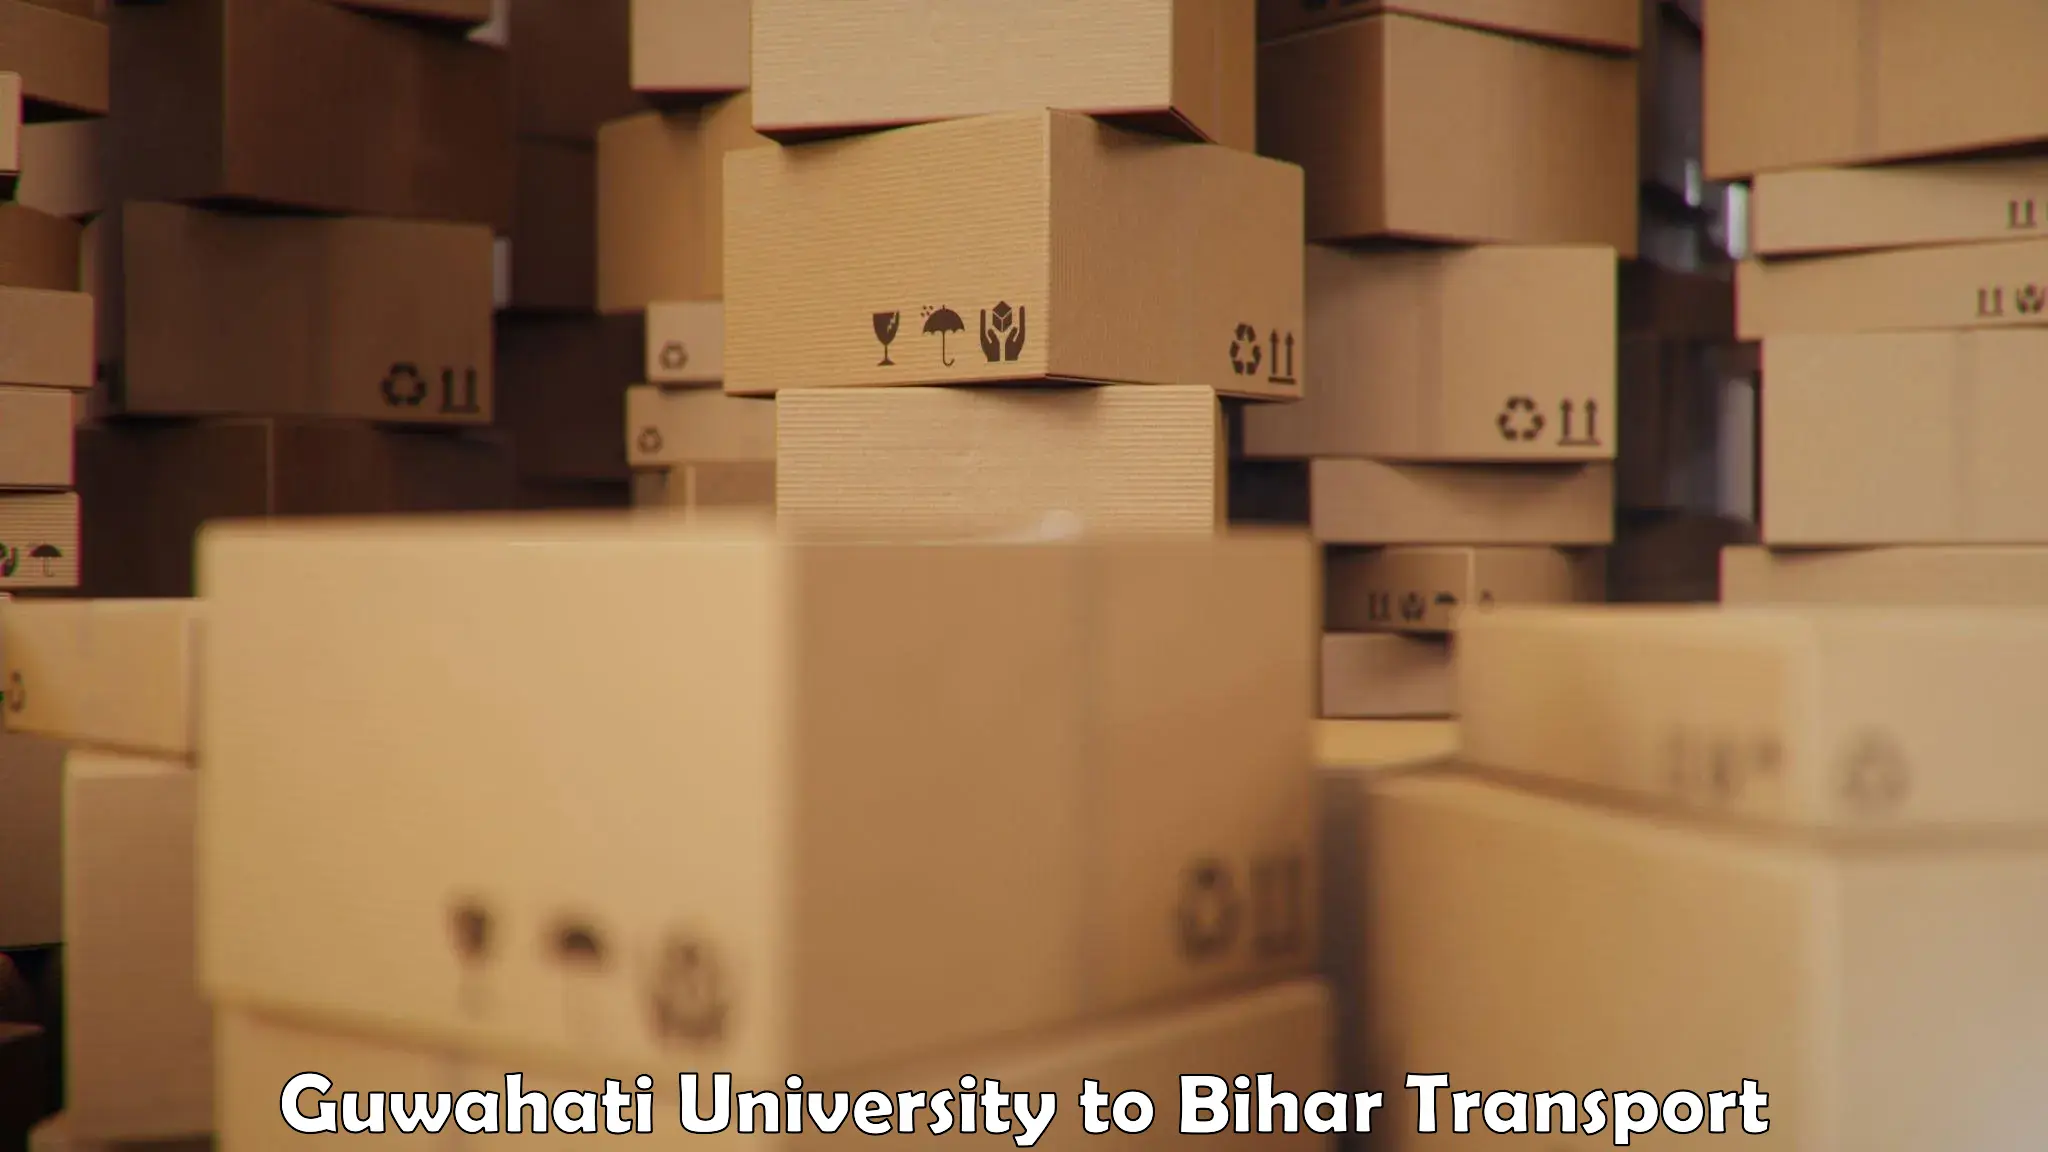 Domestic goods transportation services in Guwahati University to Chhapra